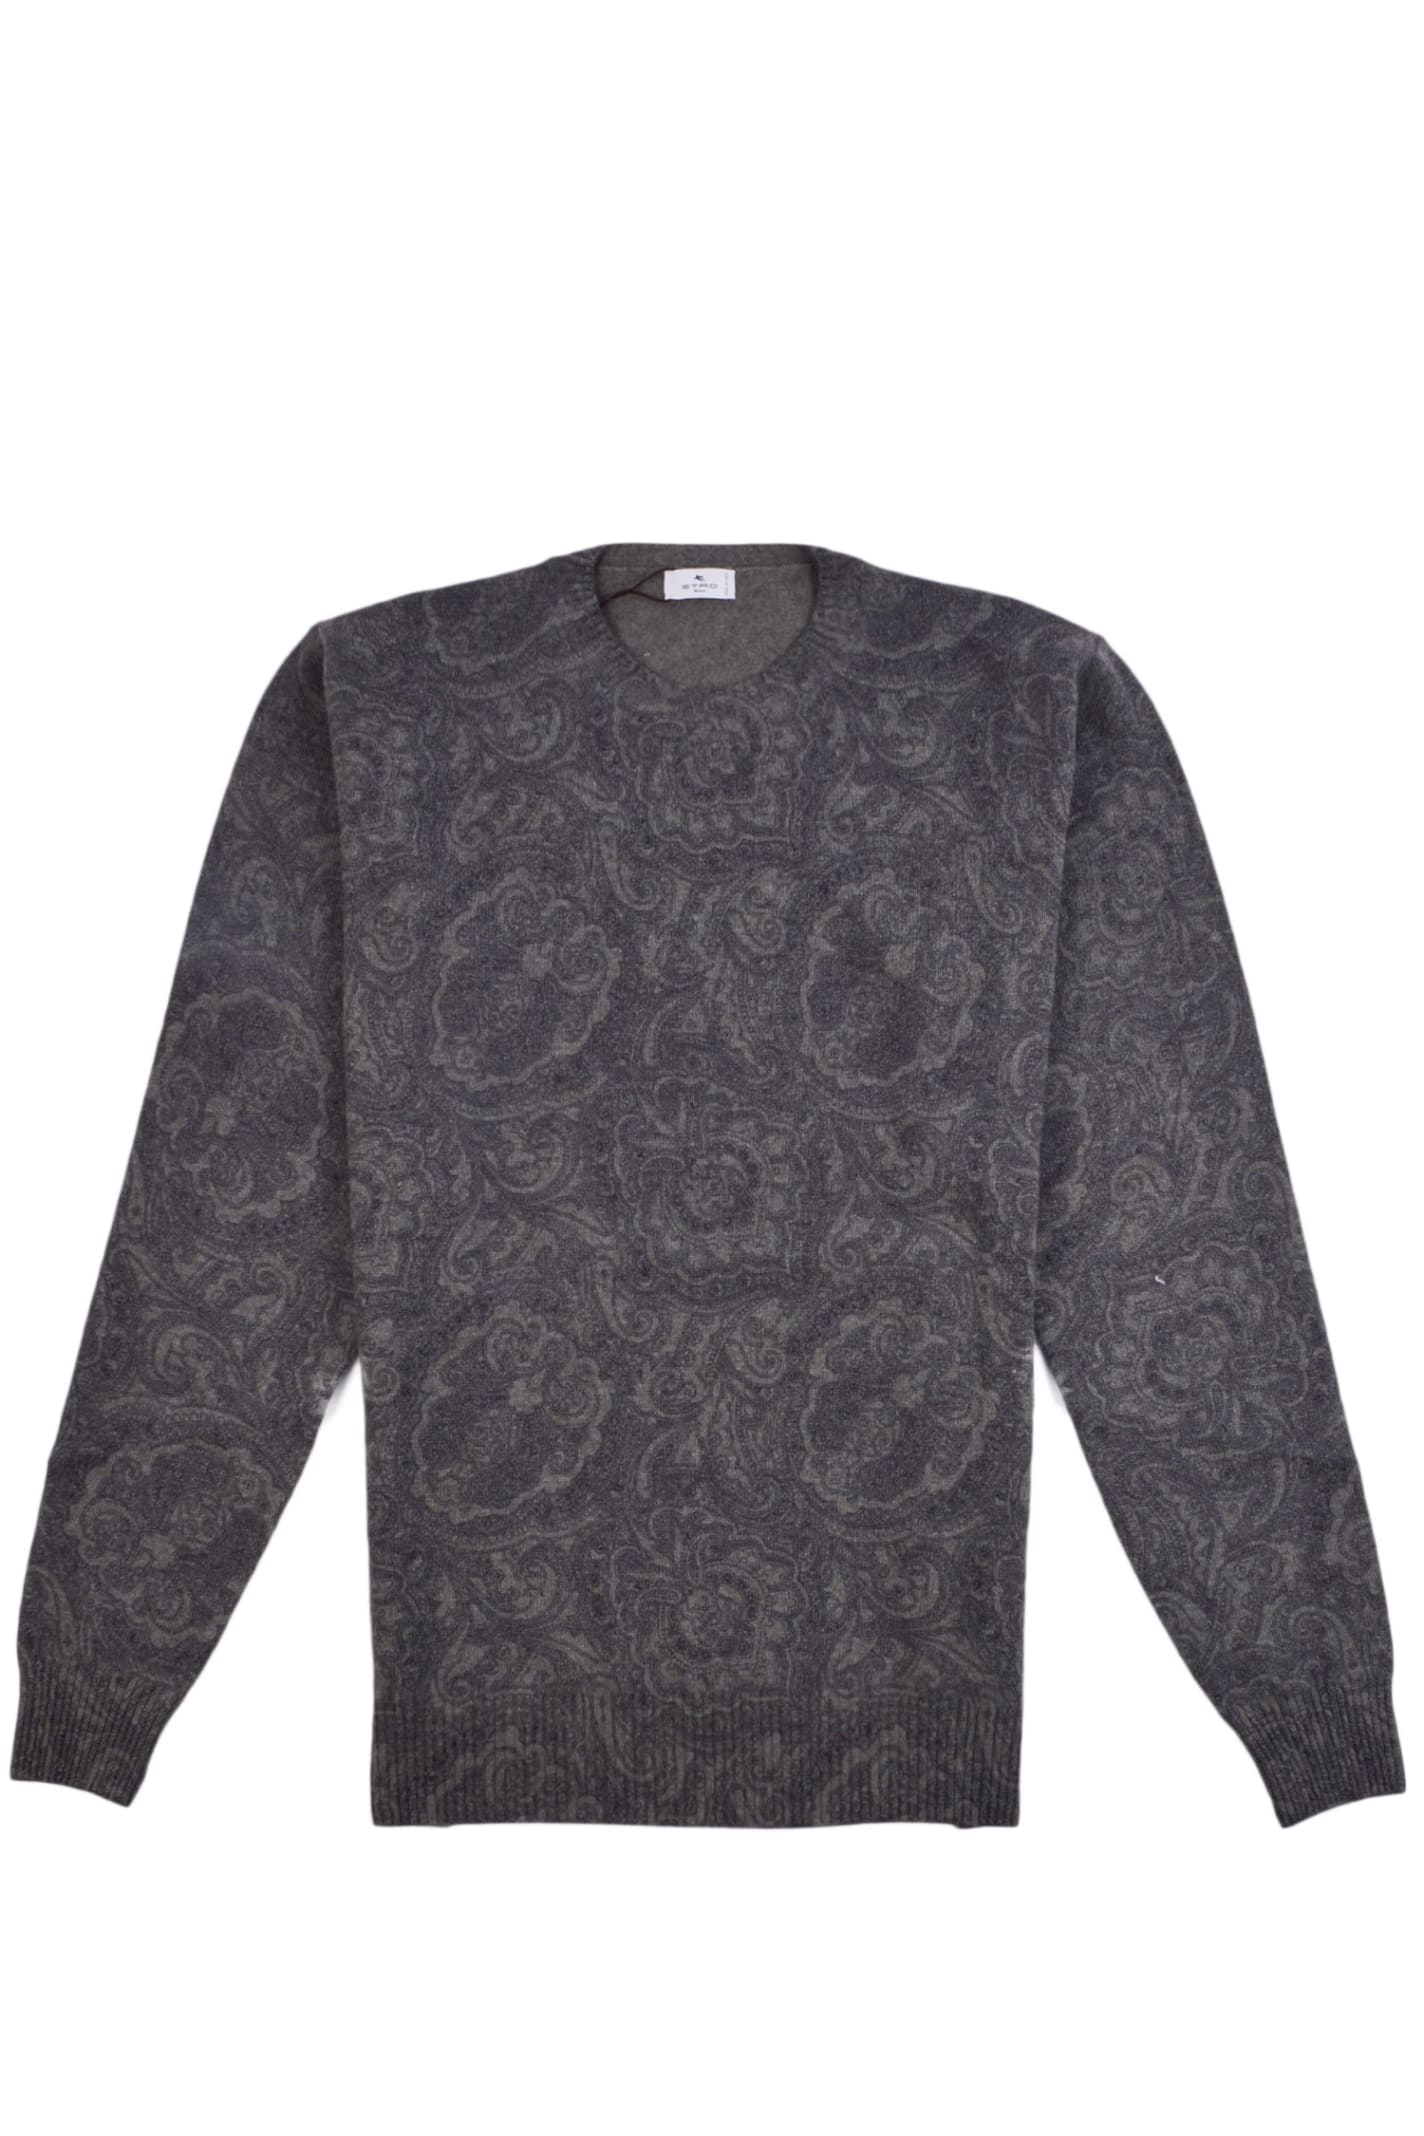 Etro Wool Sweater With Paisley Motifs